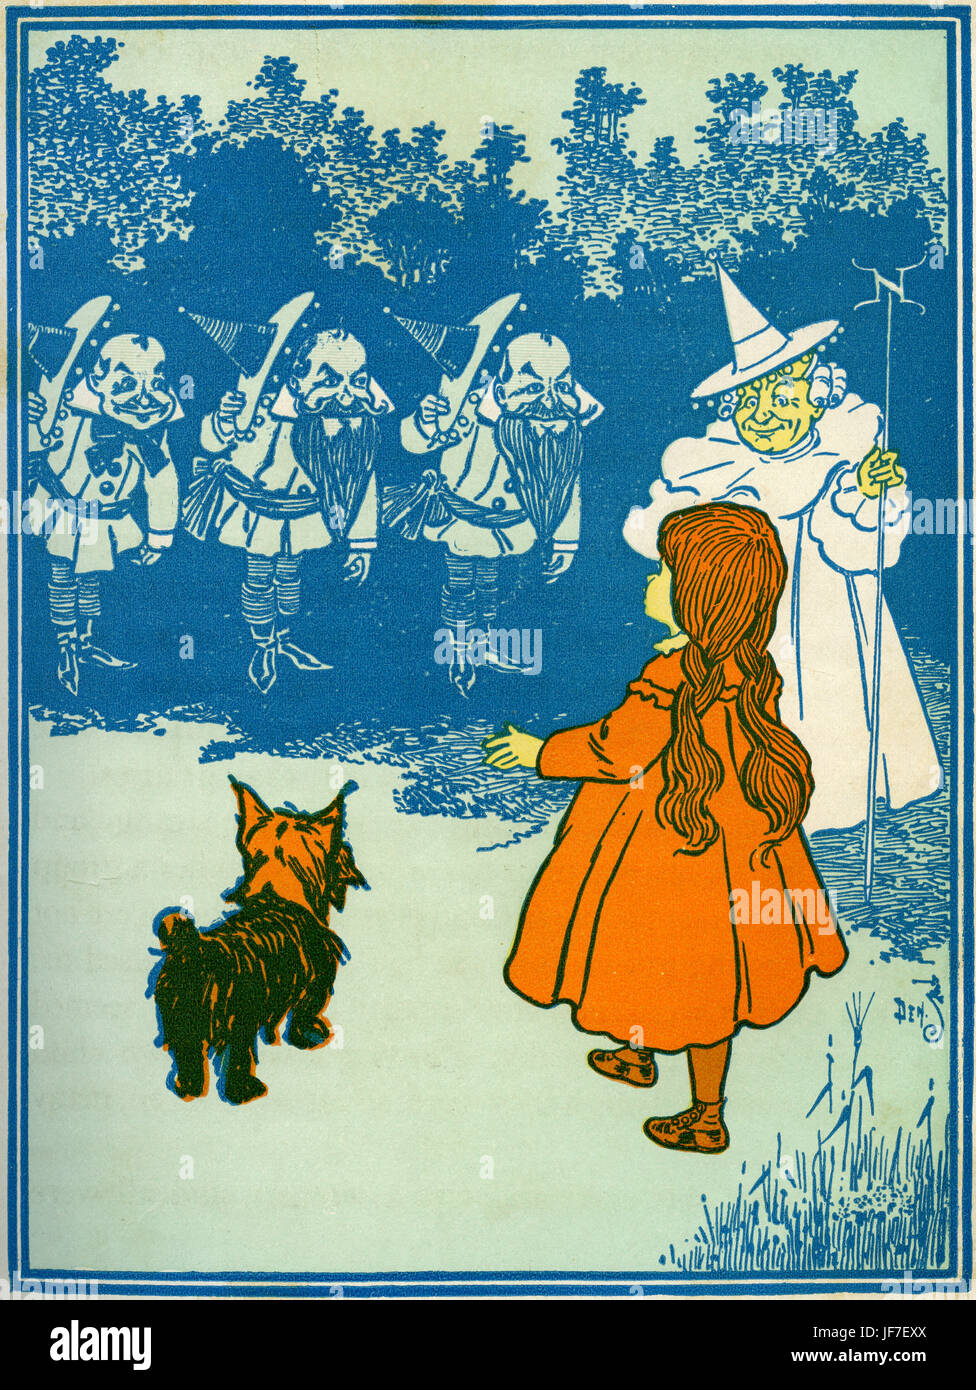 The Wizard of Oz by L. Frank Baum book . Illustration by W.W. Denslow. Caption: I am the Witch of the North. Published by Bobbs Merill. American author, 15 May 1856 – 6 May 1919 Stock Photo